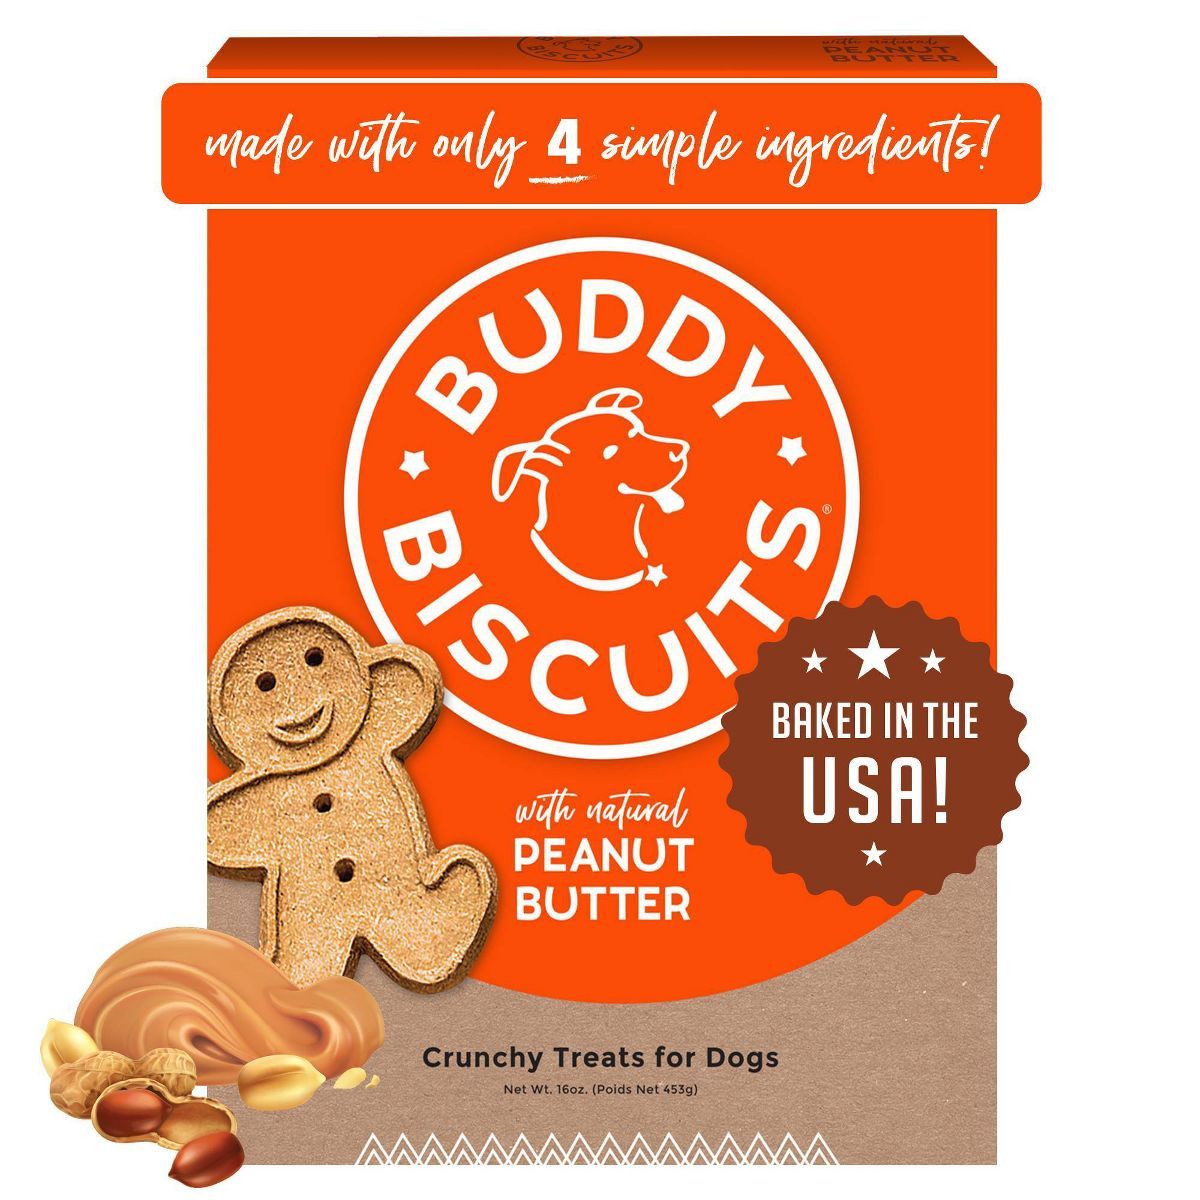 Buddy Biscuits Oven Baked Crunchy Peanut Butter Dog Treats | Target